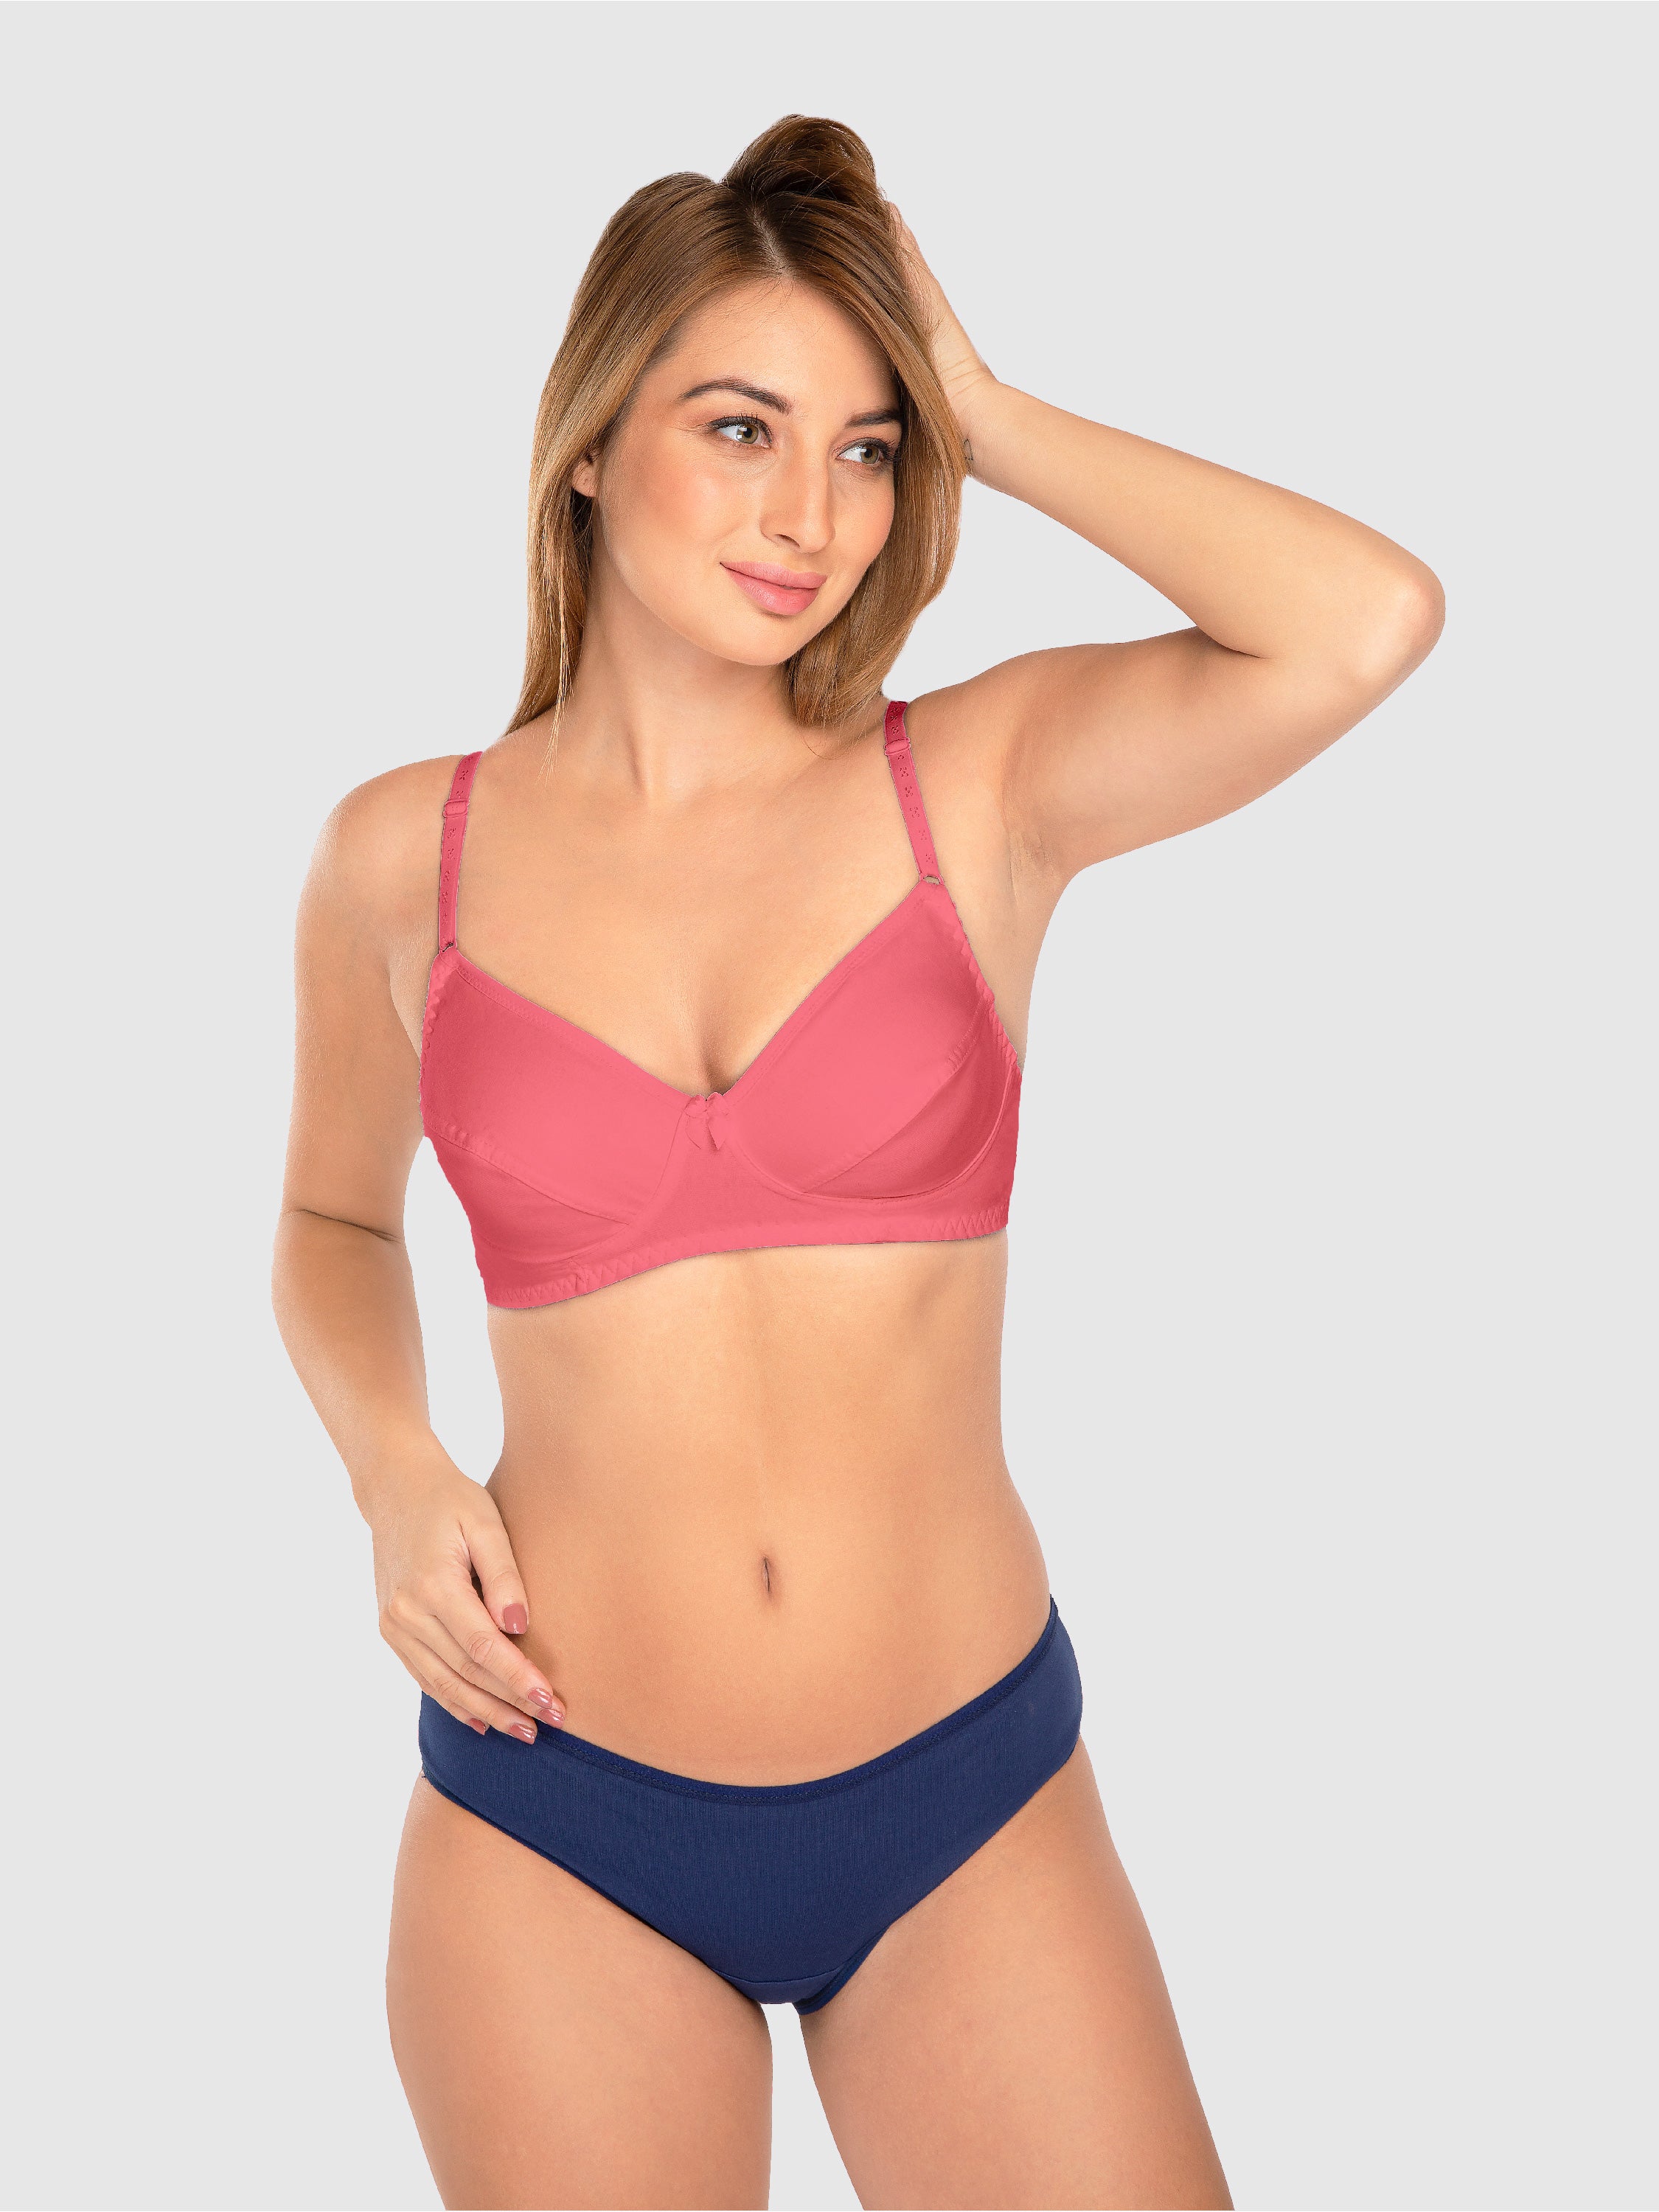 Daisy Dee Carrot Non Padded Non Wired Full Coverage Bra NCLBR-Carrot